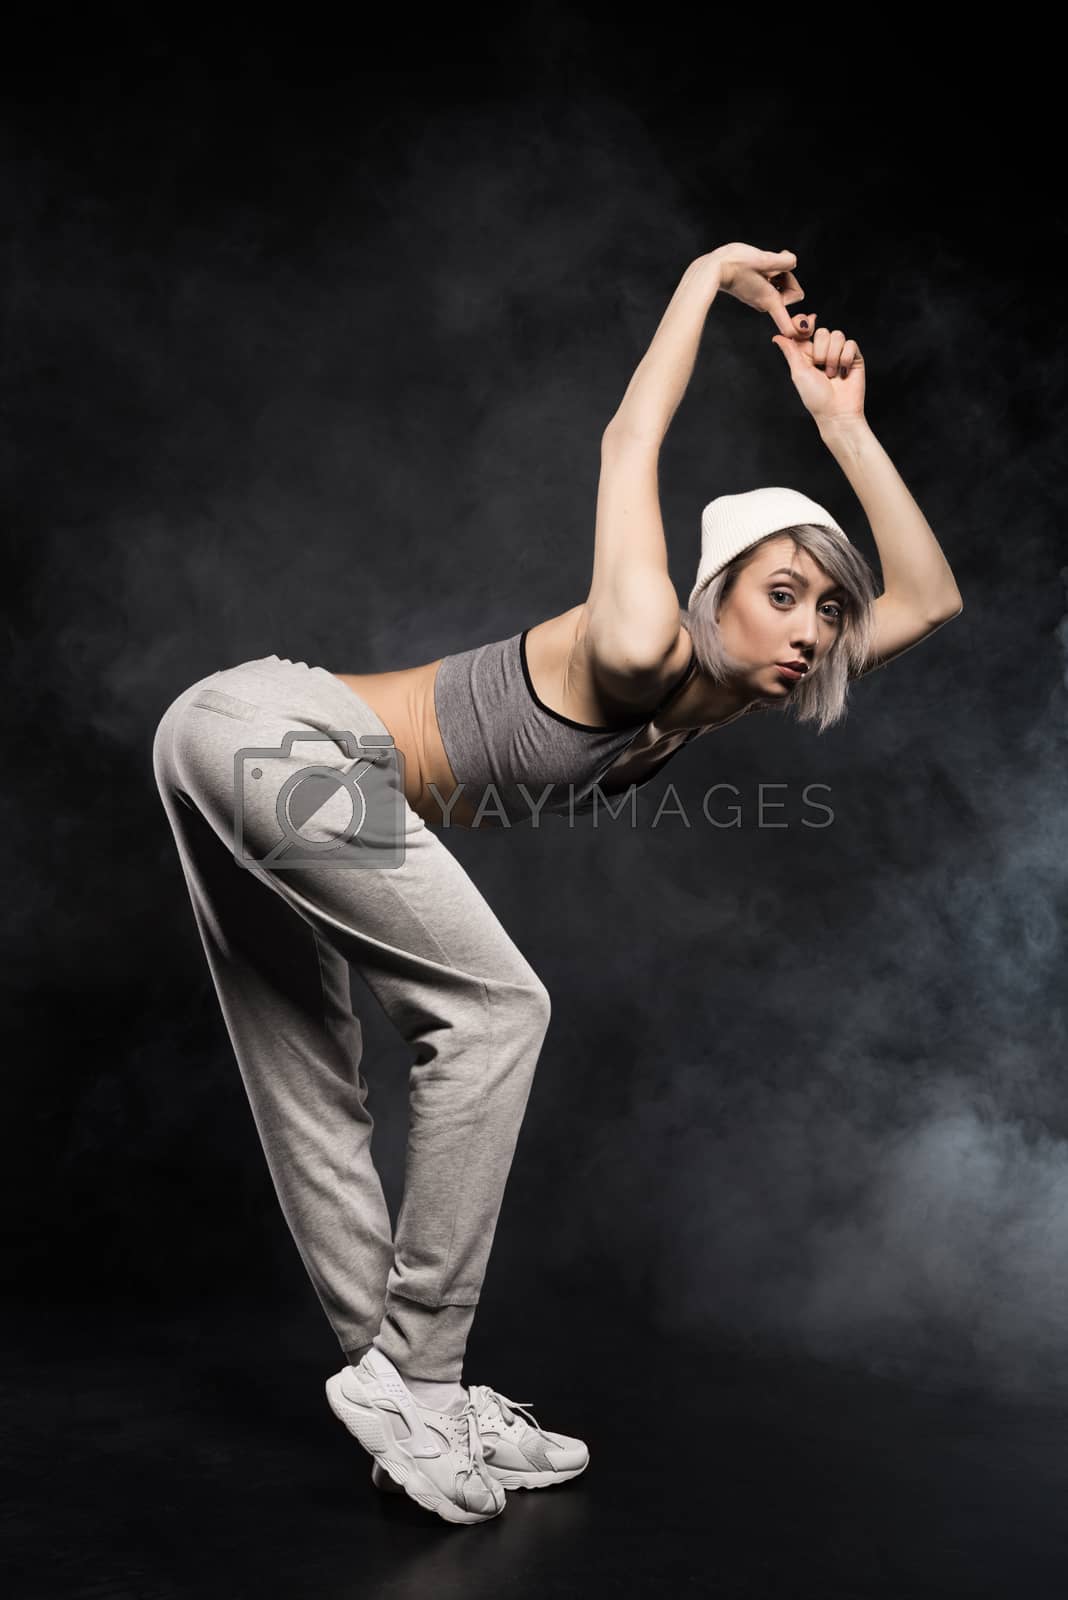 Royalty free image of side view of woman in sports clothing dancing on black by LightFieldStudios